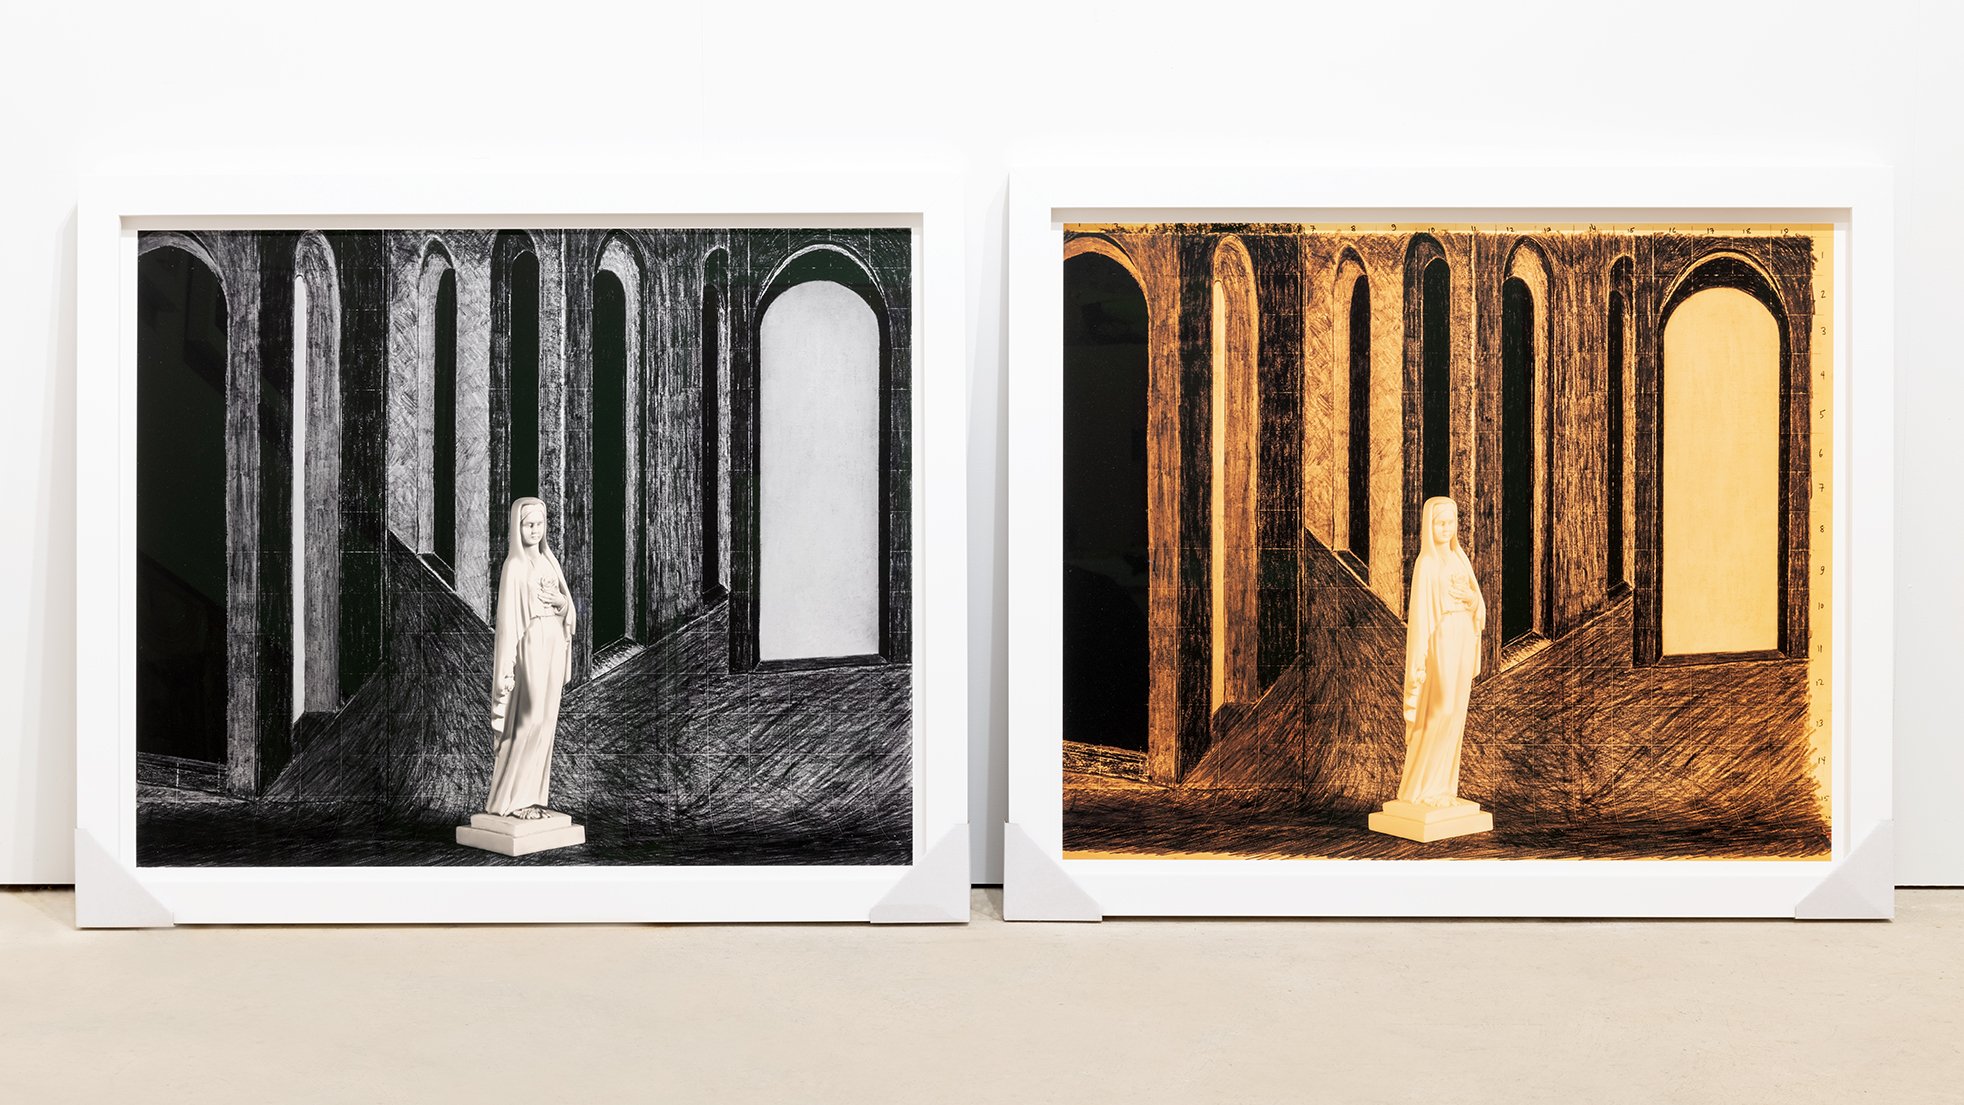    Chance Encounters    Mary in a de Chirico Dream 1 &amp; 2  (Framed artworks in my studio)    